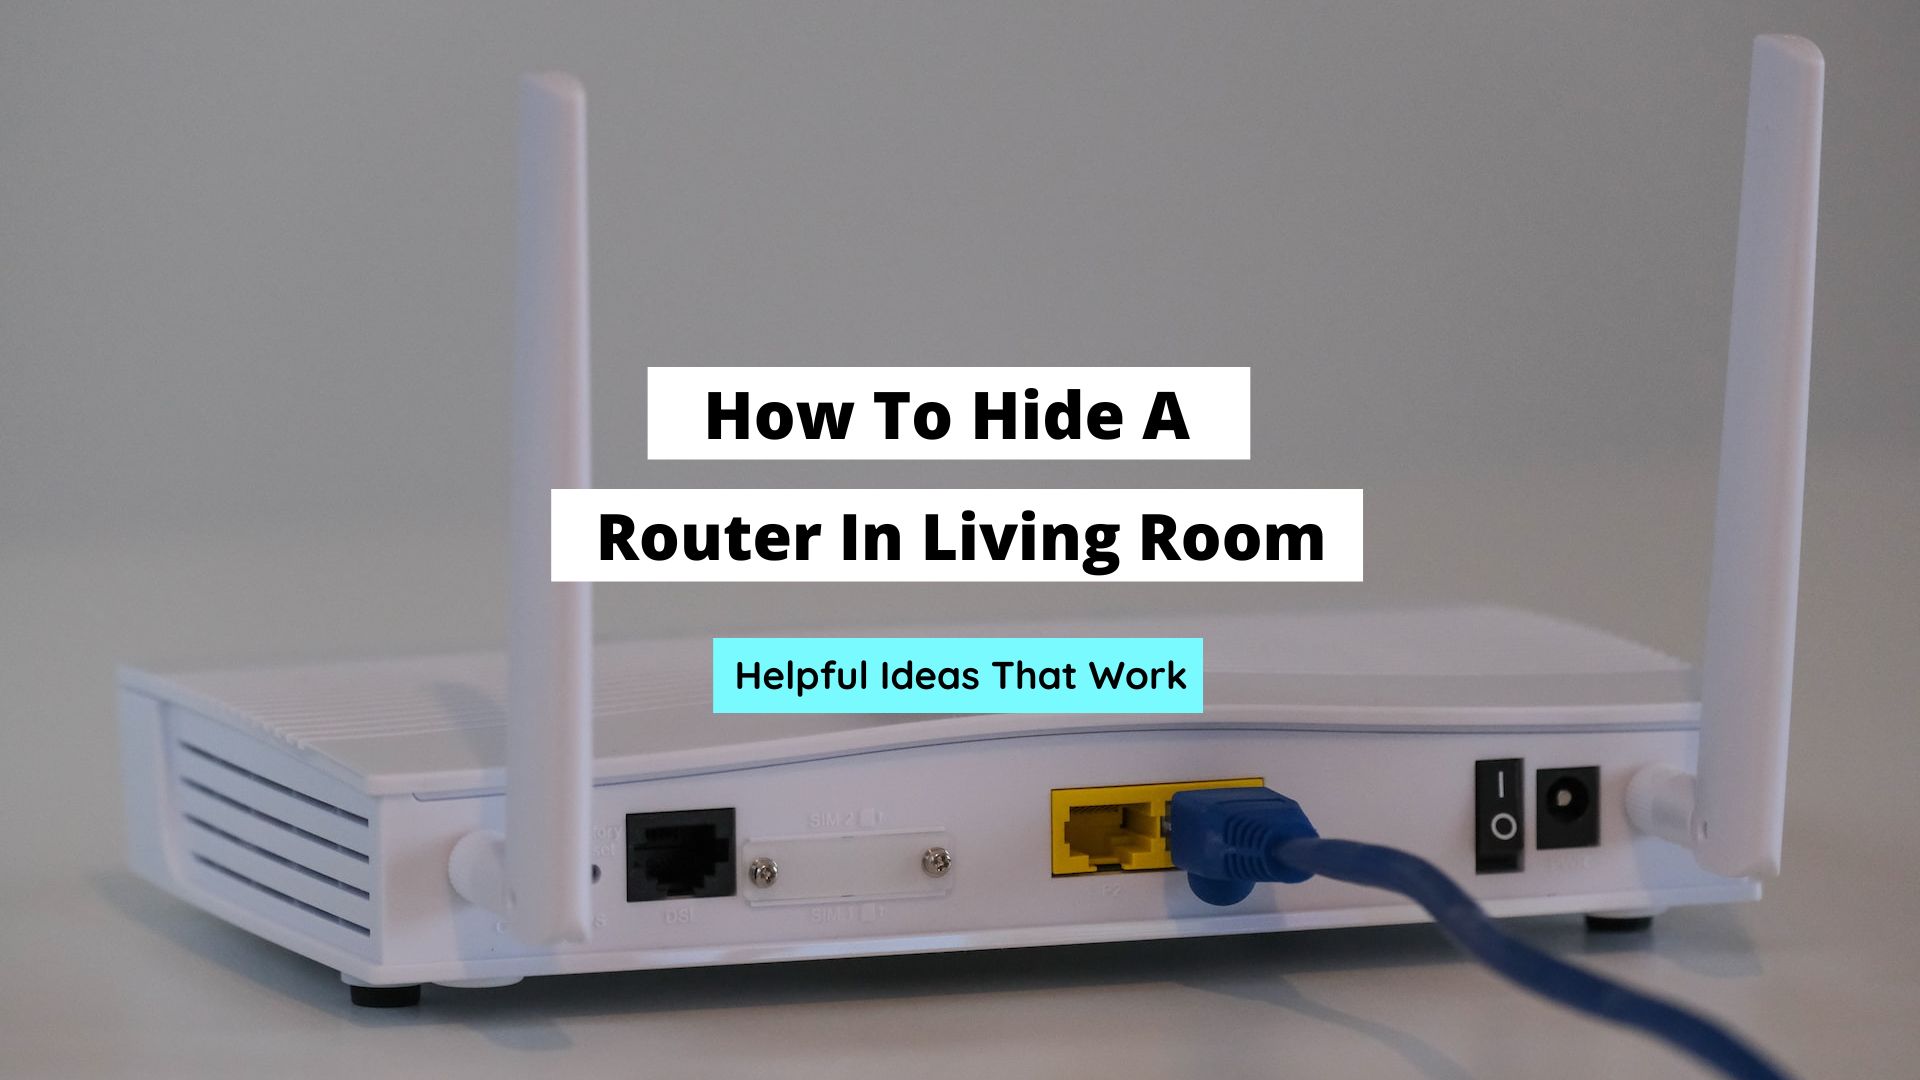 roku 3500 router living room